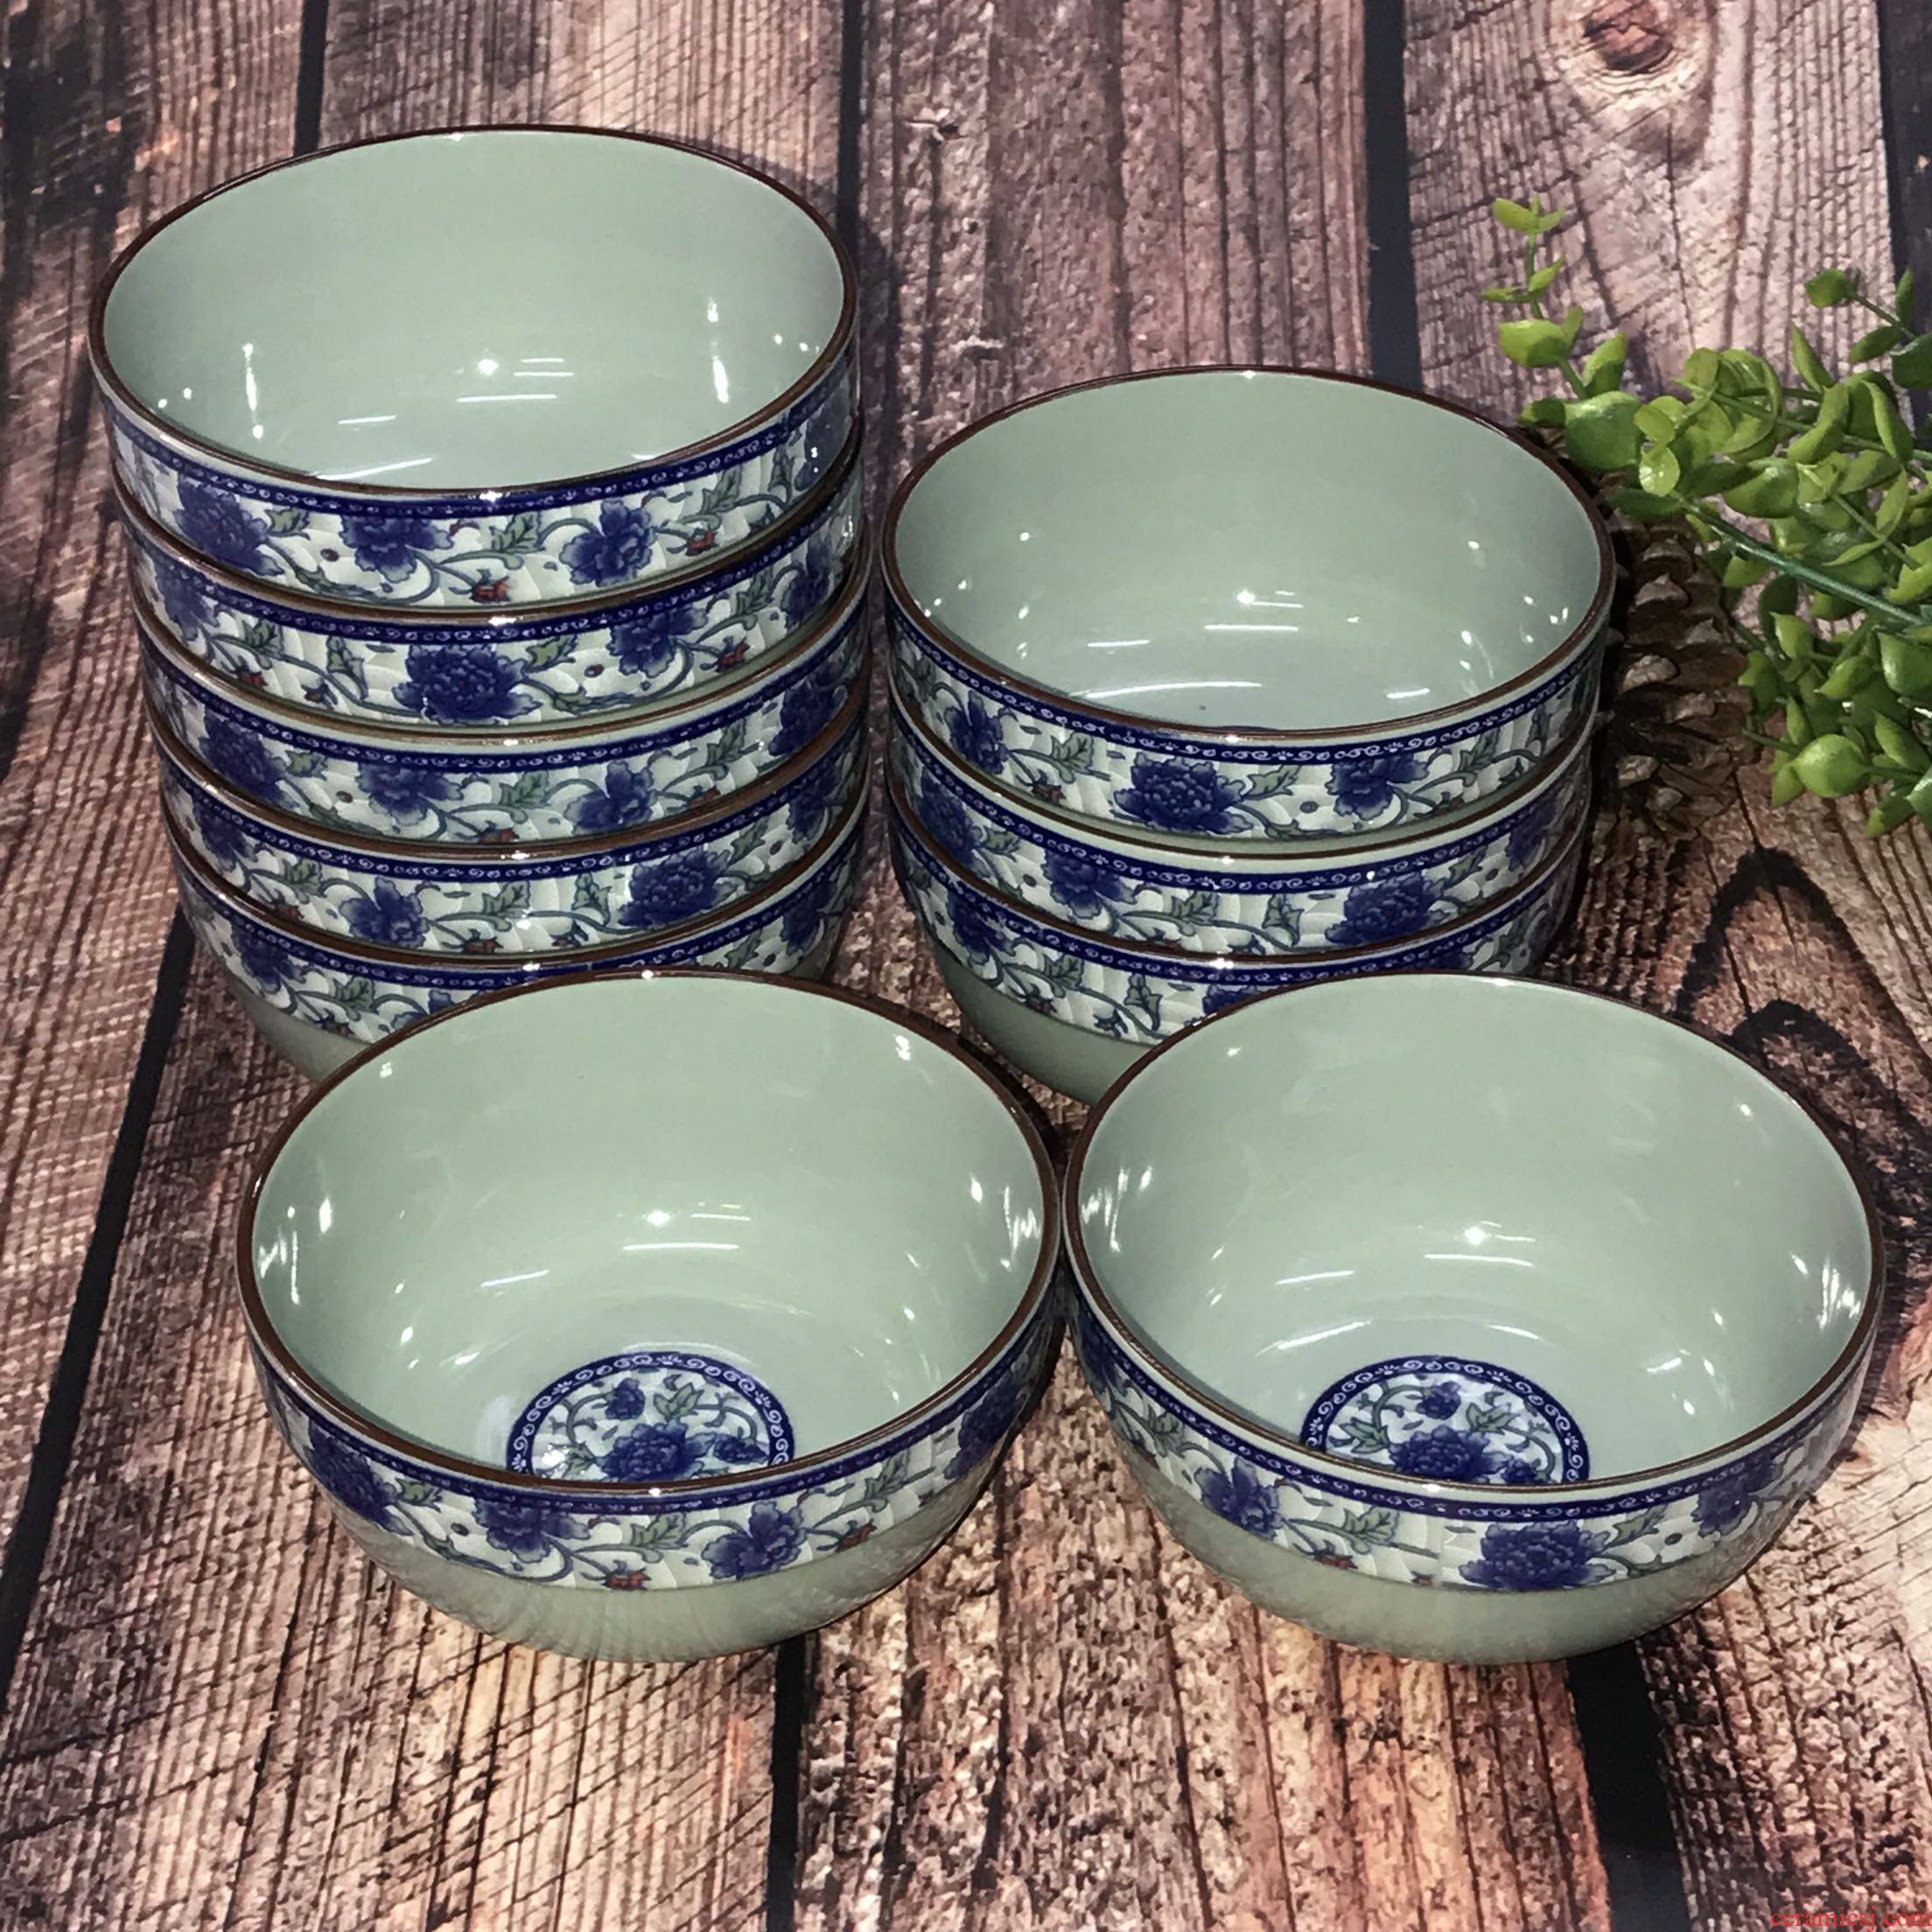 Eat rice bowl of blue and white porcelain household ceramic bowl of soup bowl edge thickening Chinese wind restoring ancient ways tableware 10 m jobs